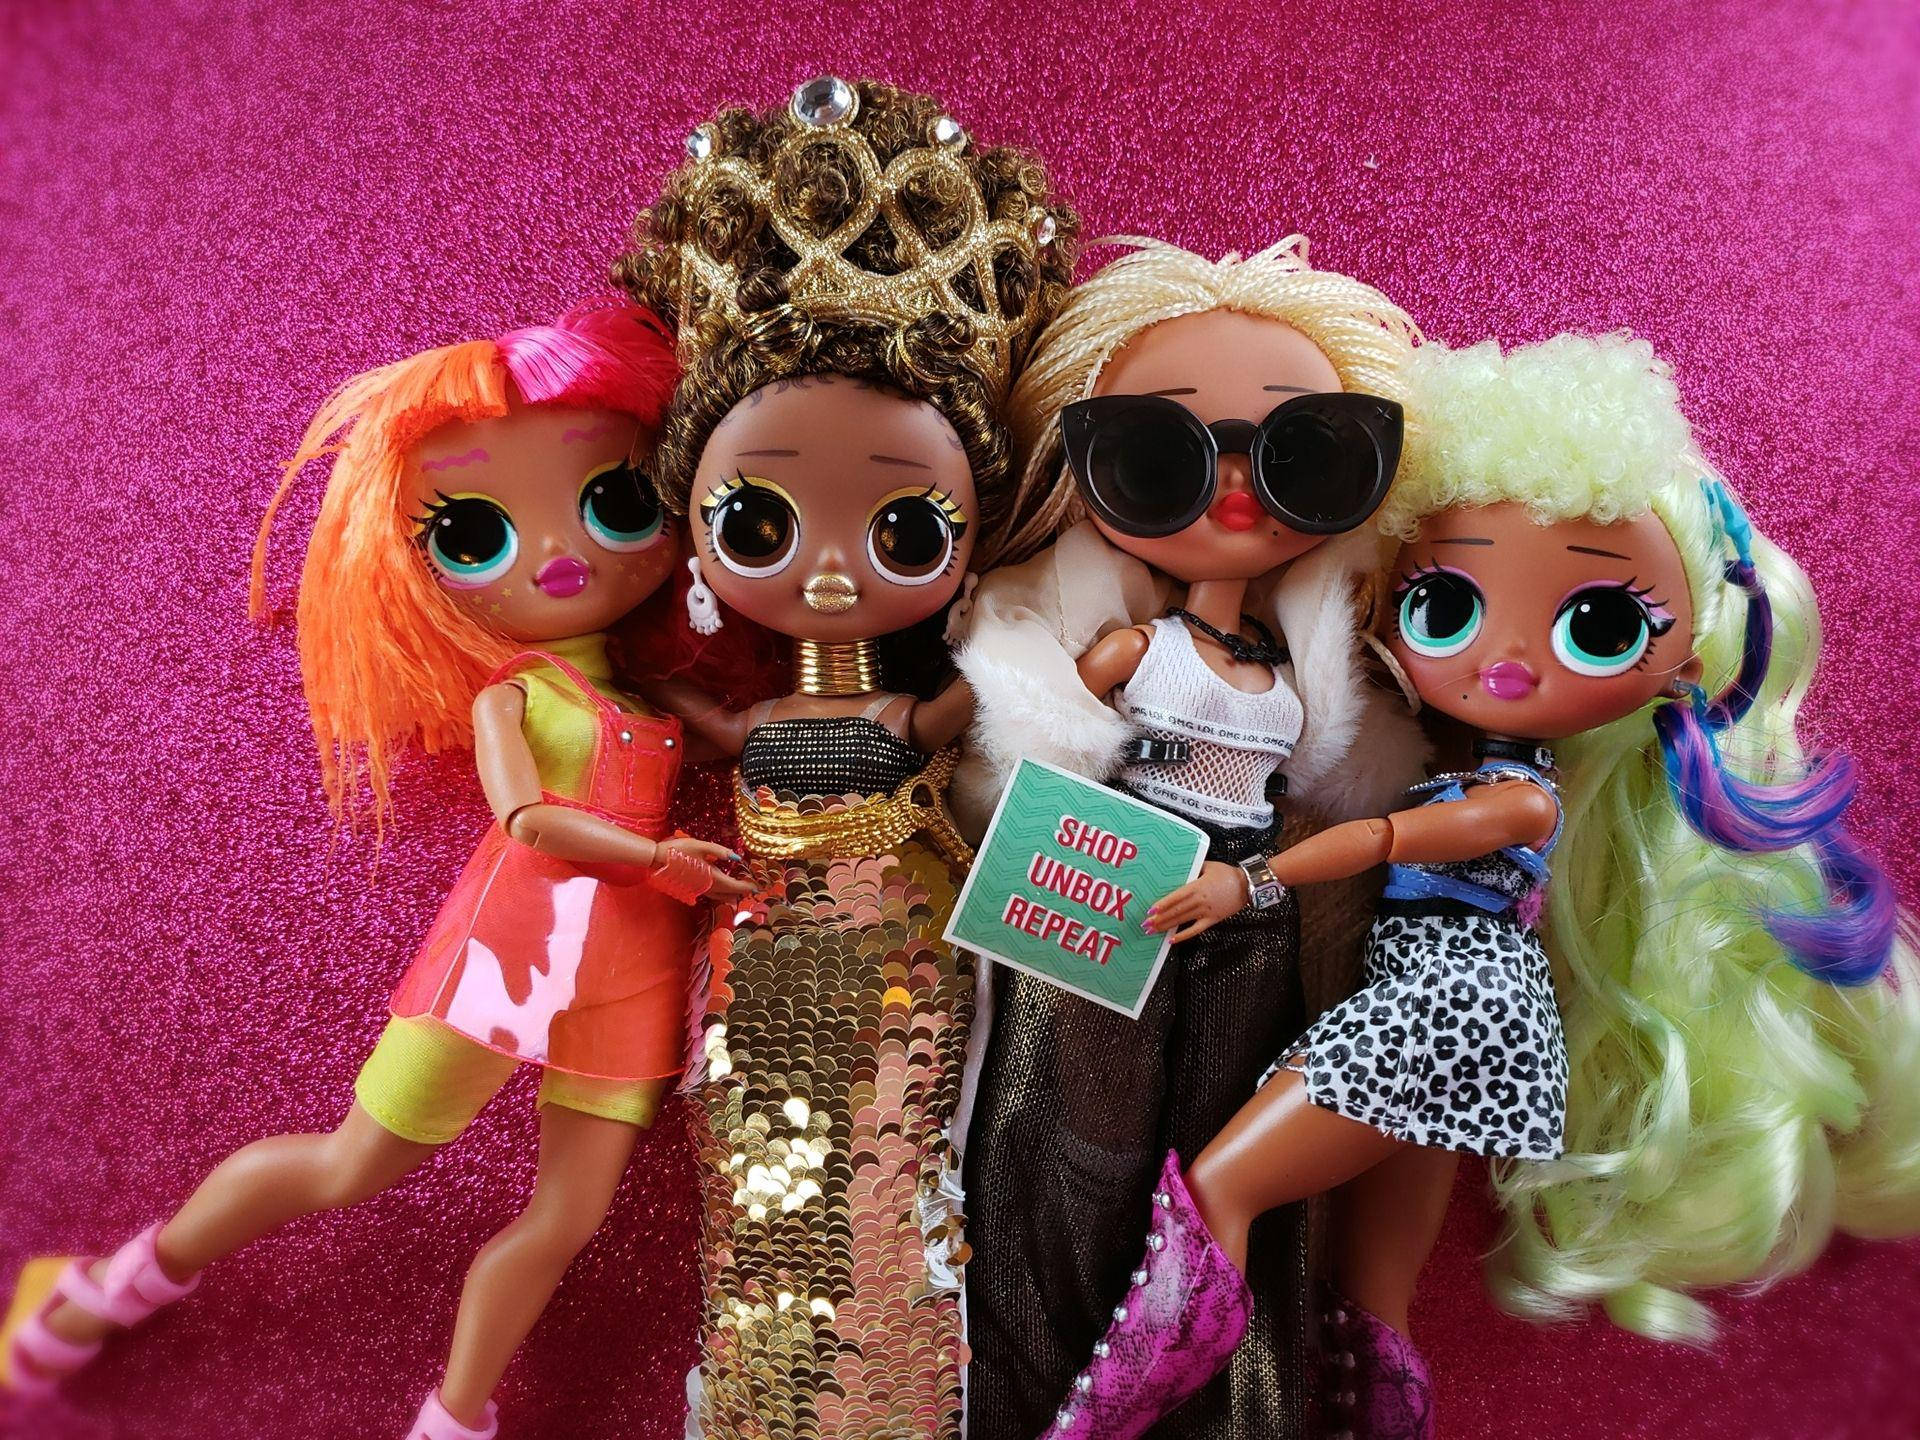 The Fun Never Ends With Lol Dolls! Background